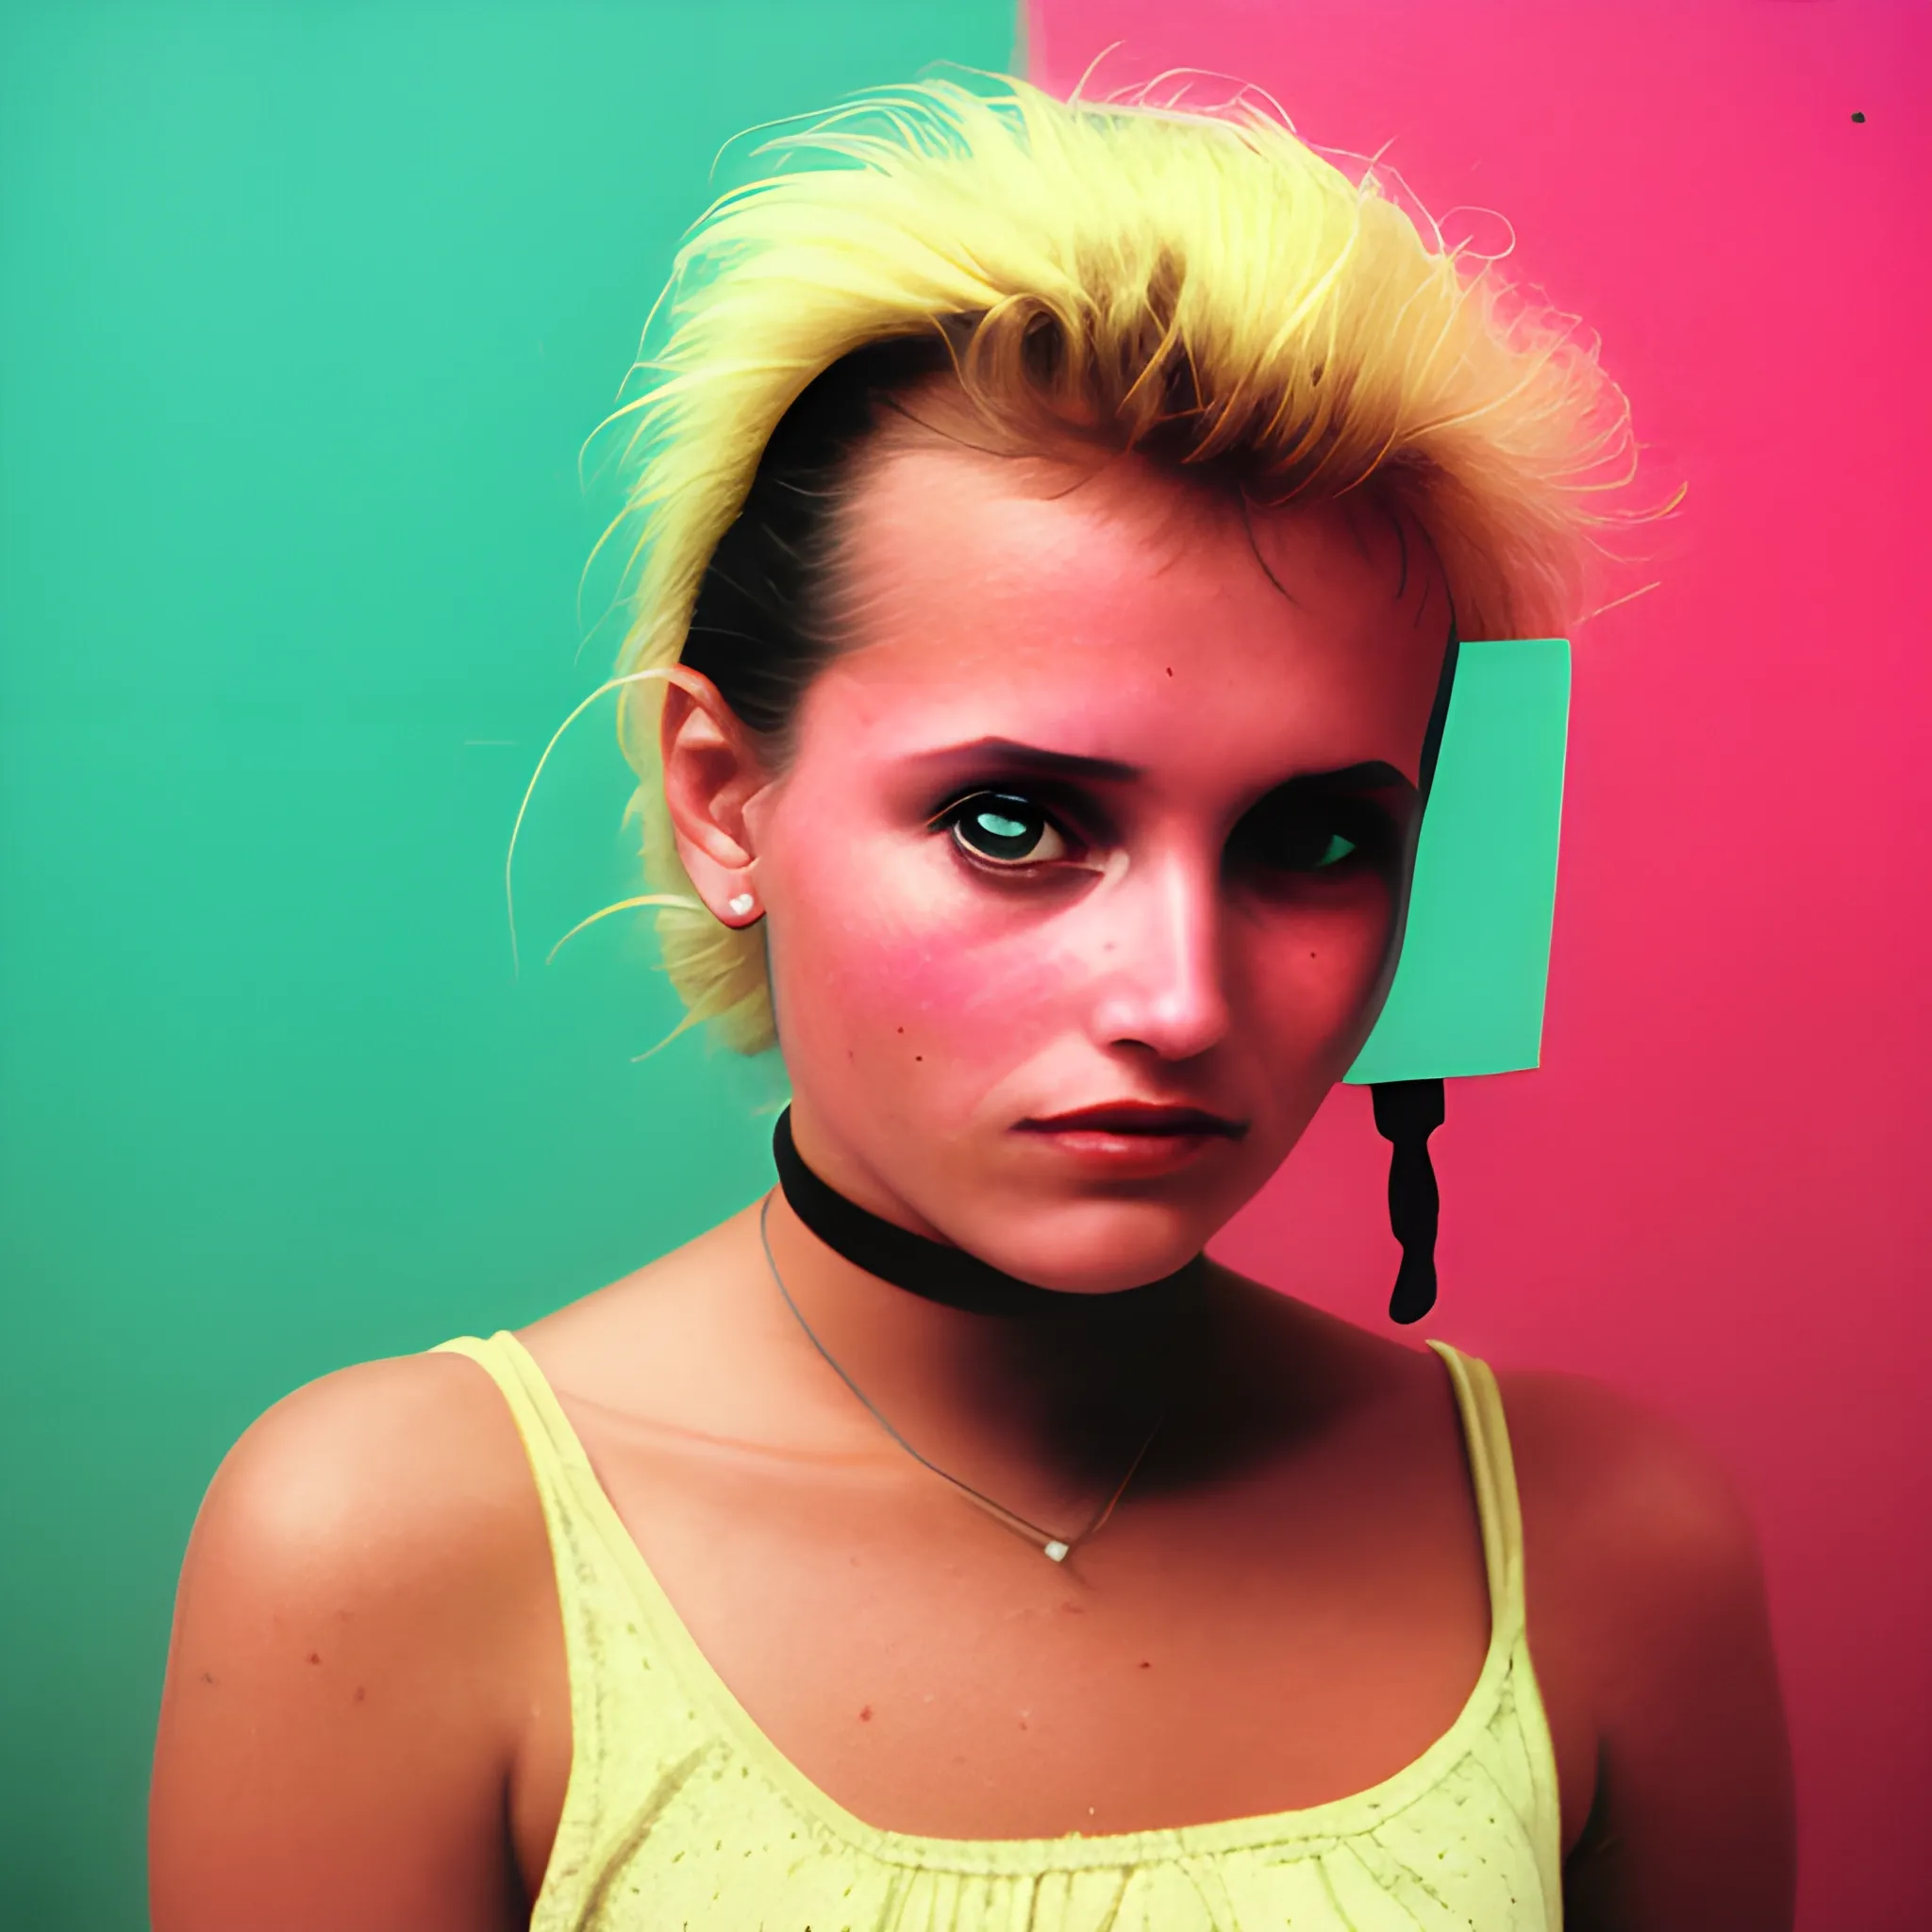 80s, overdeveloped photo of a woman